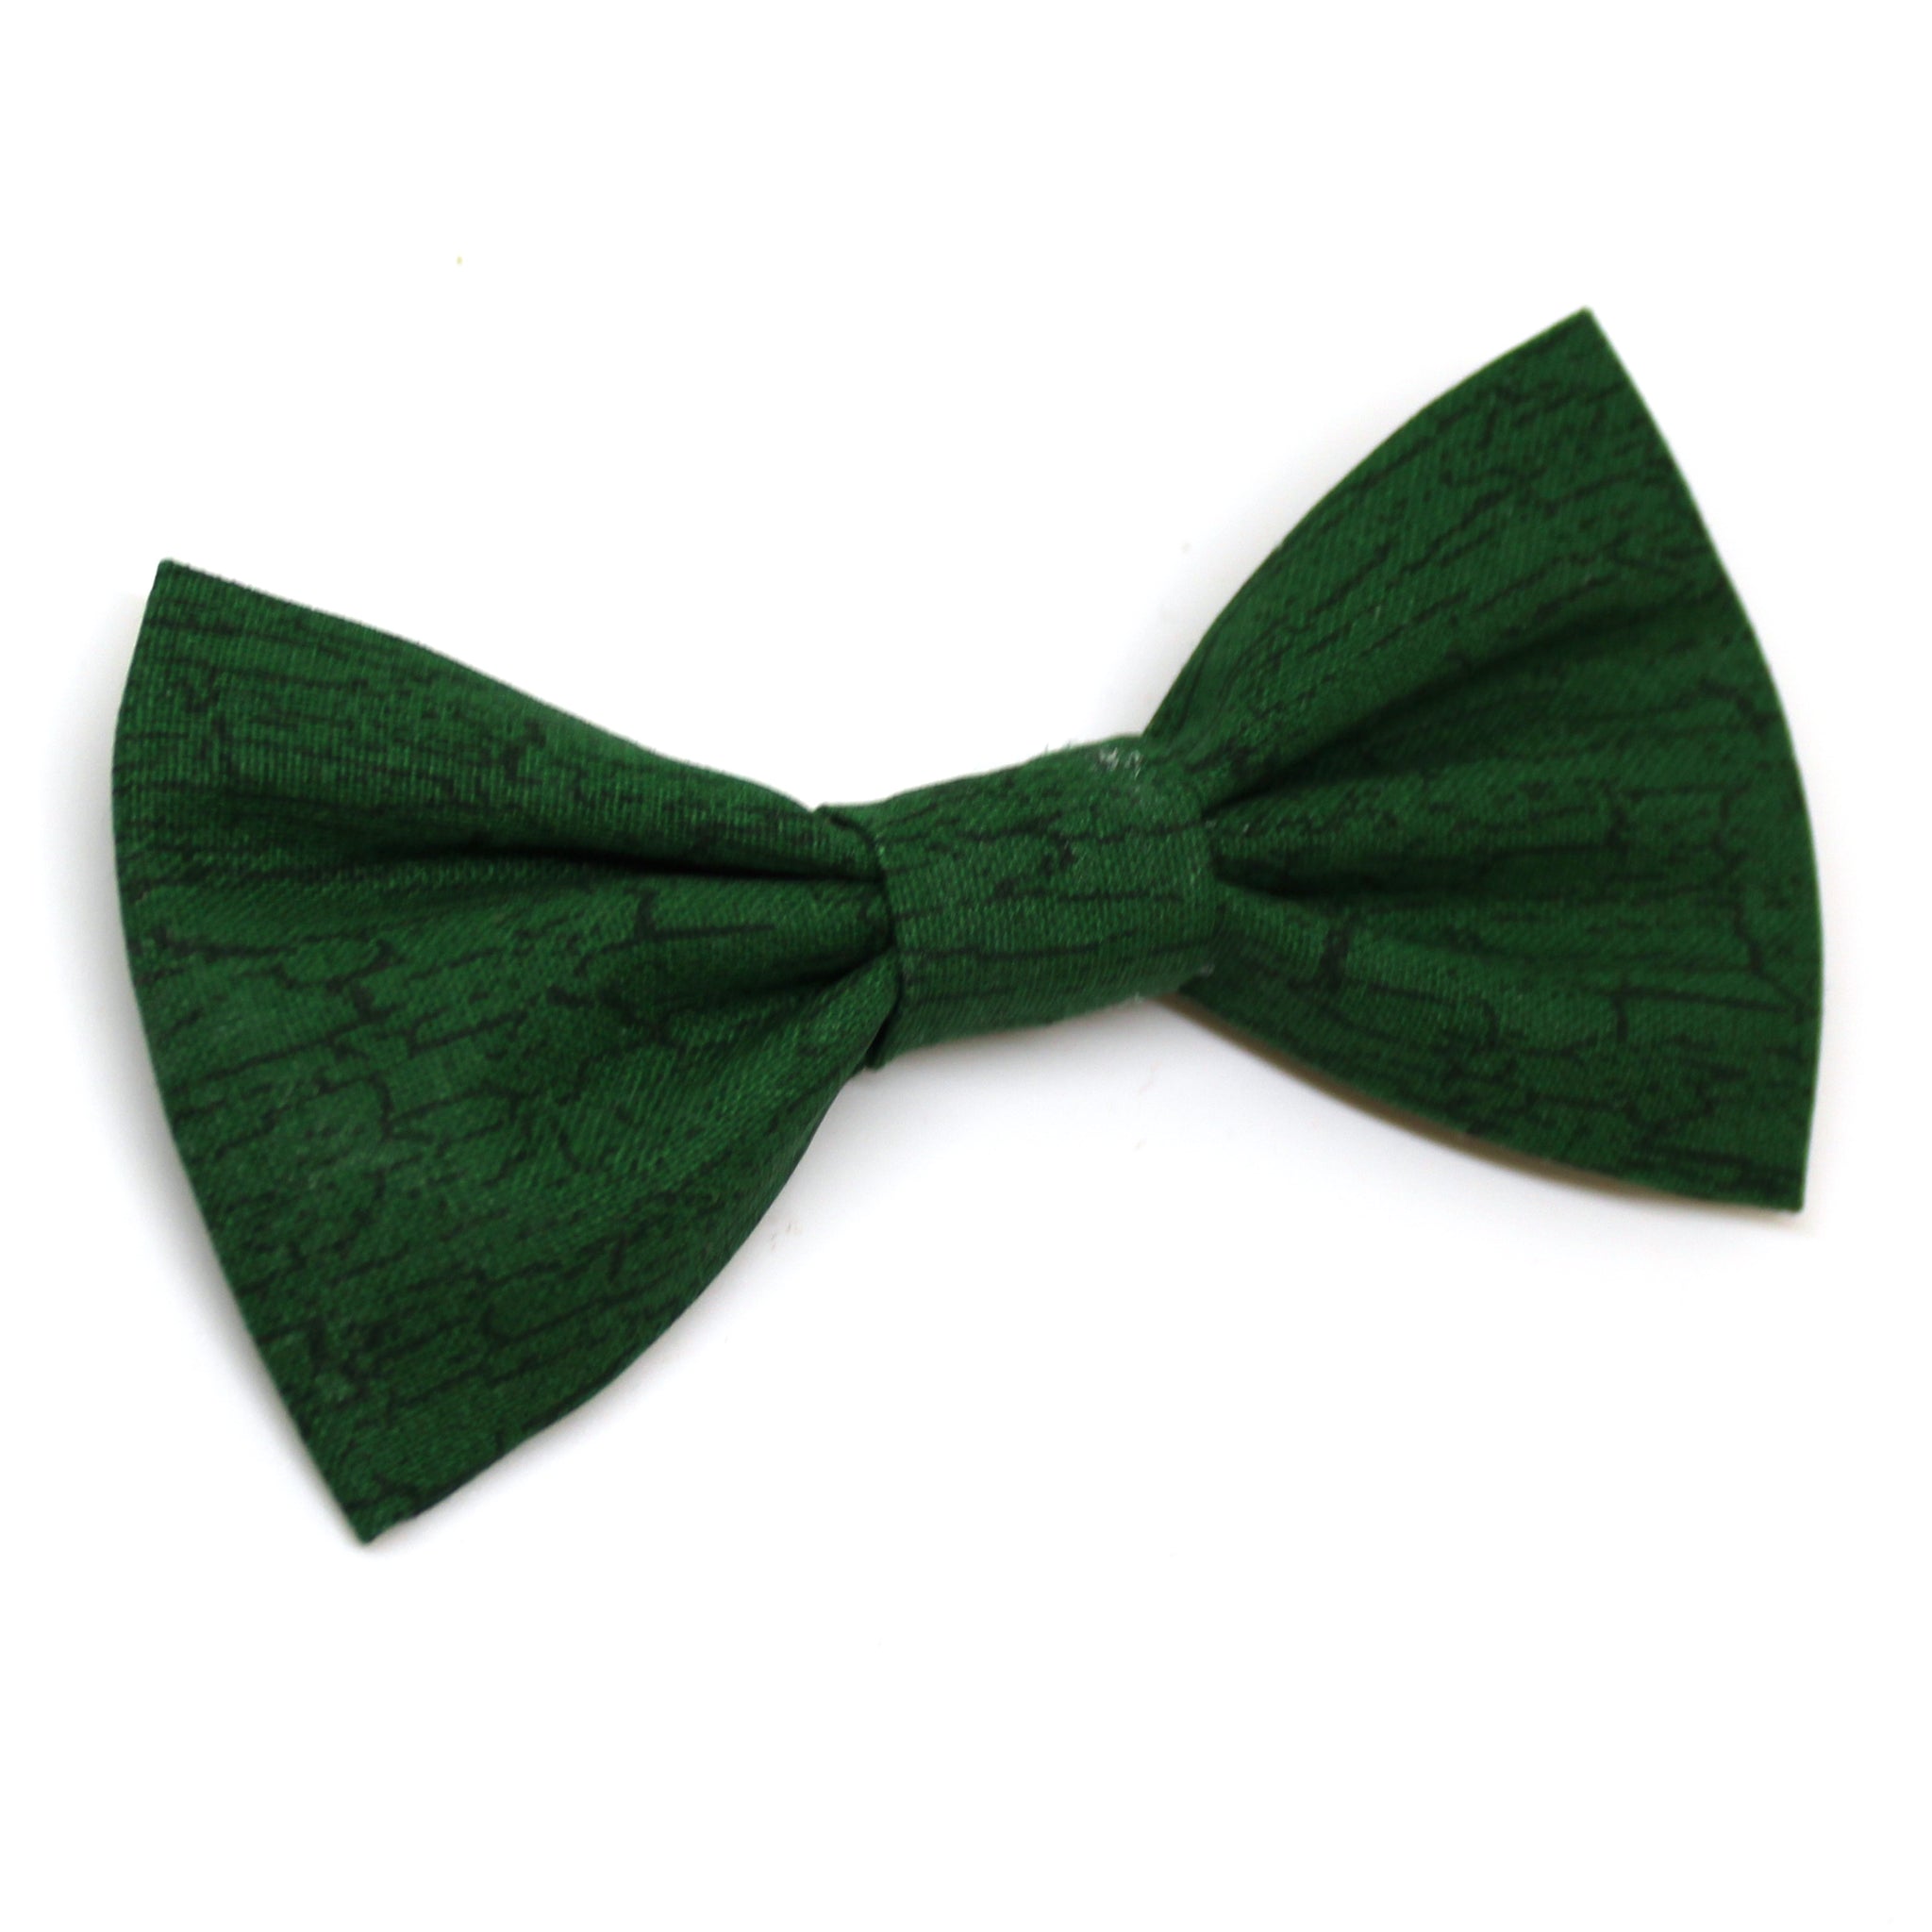 Patterned Green Bow Tie